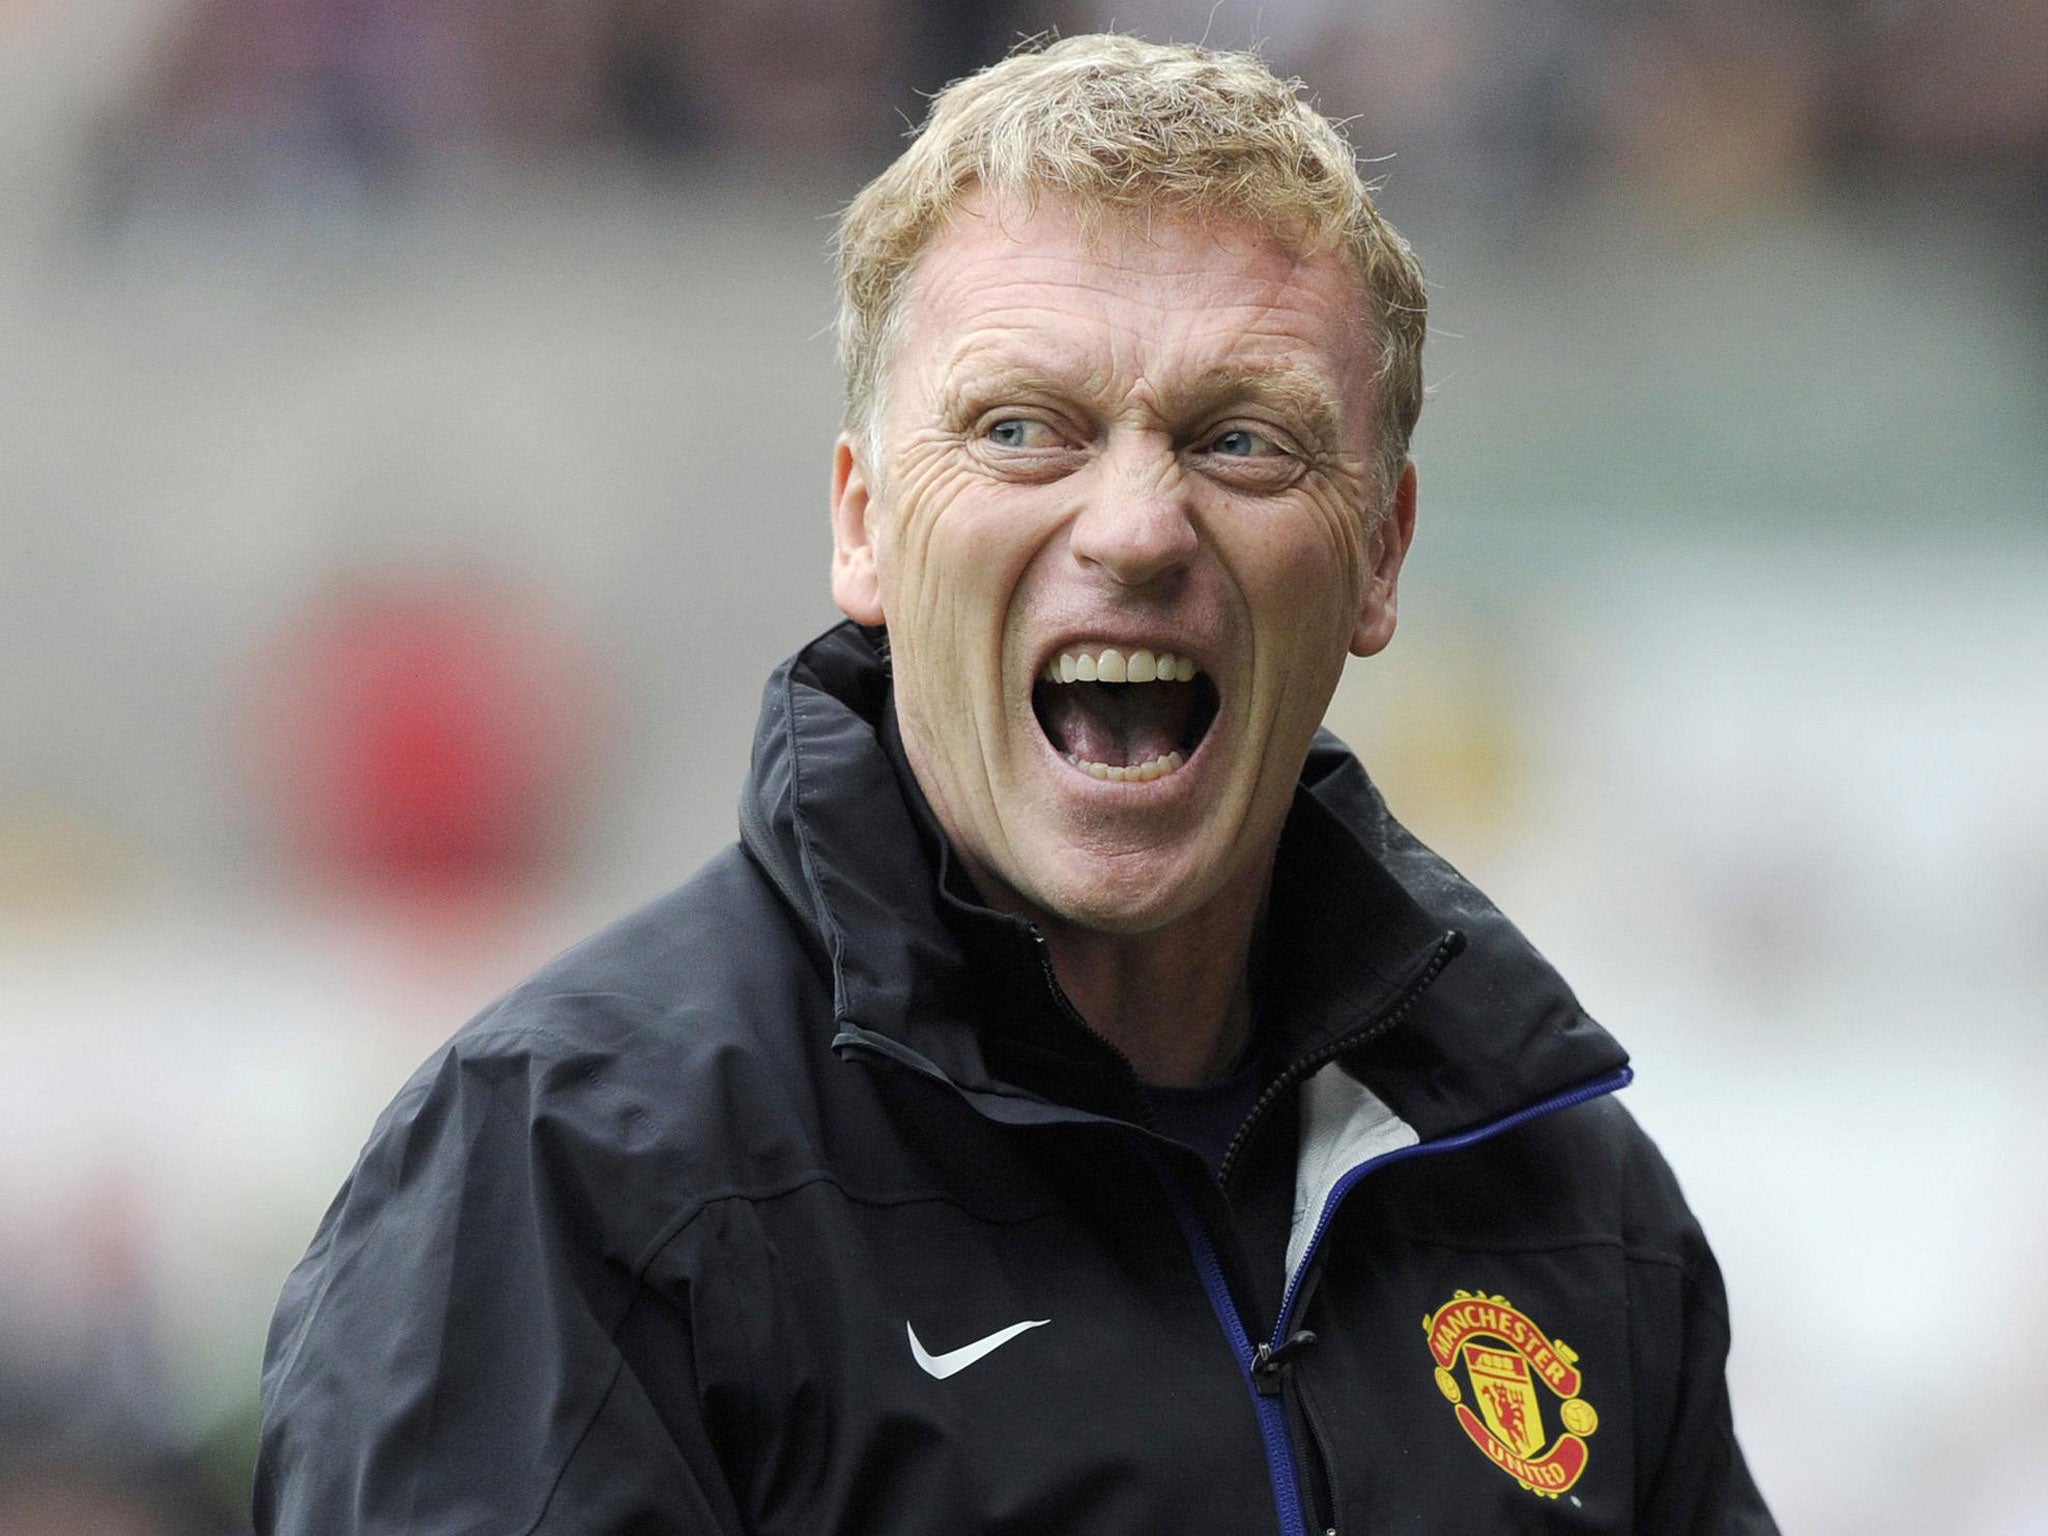 David Moyes said he wasn’t nervous before his first game